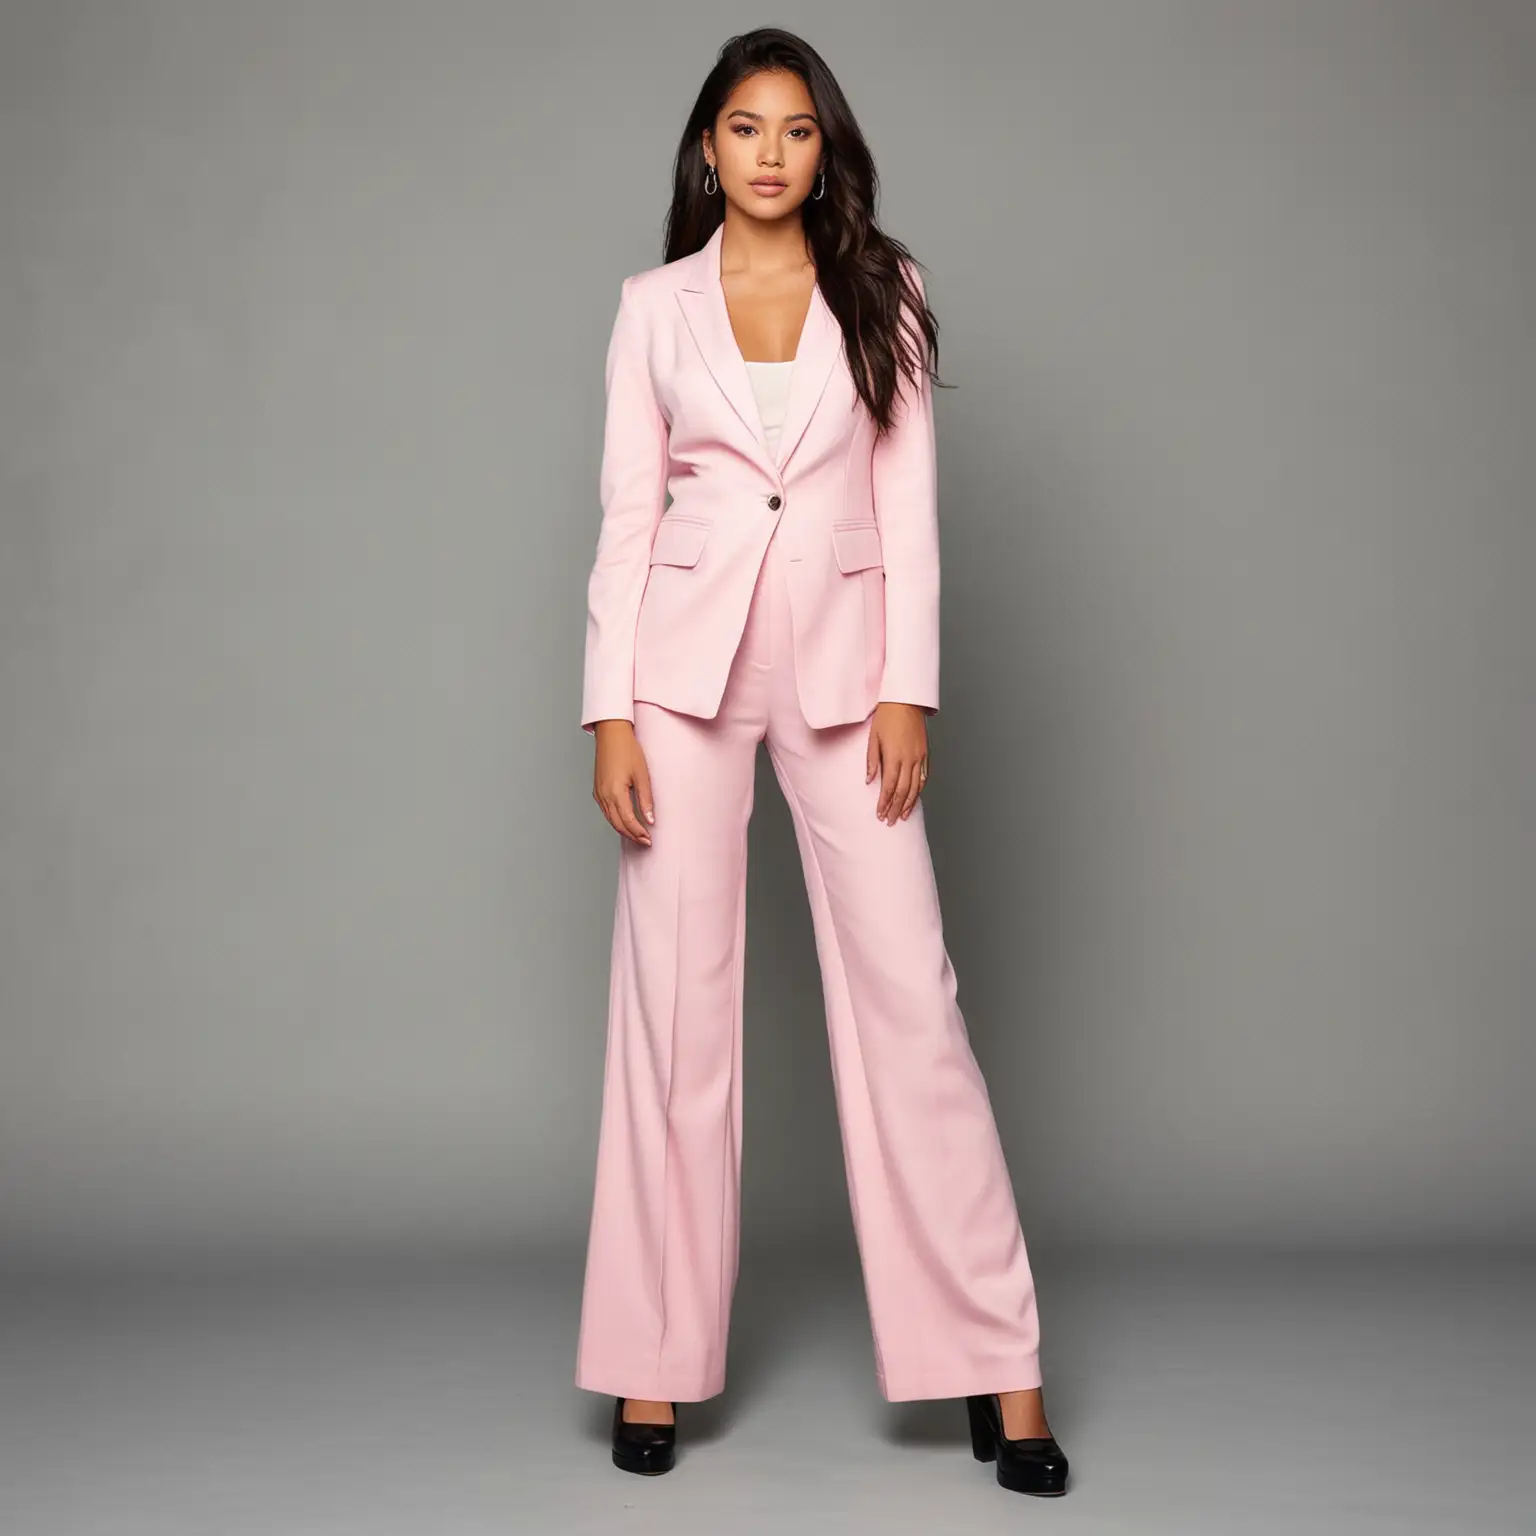 Latina Teenage Girl Interview Outfit Stylish Wide Leg Pant Suit with Platform Loafers